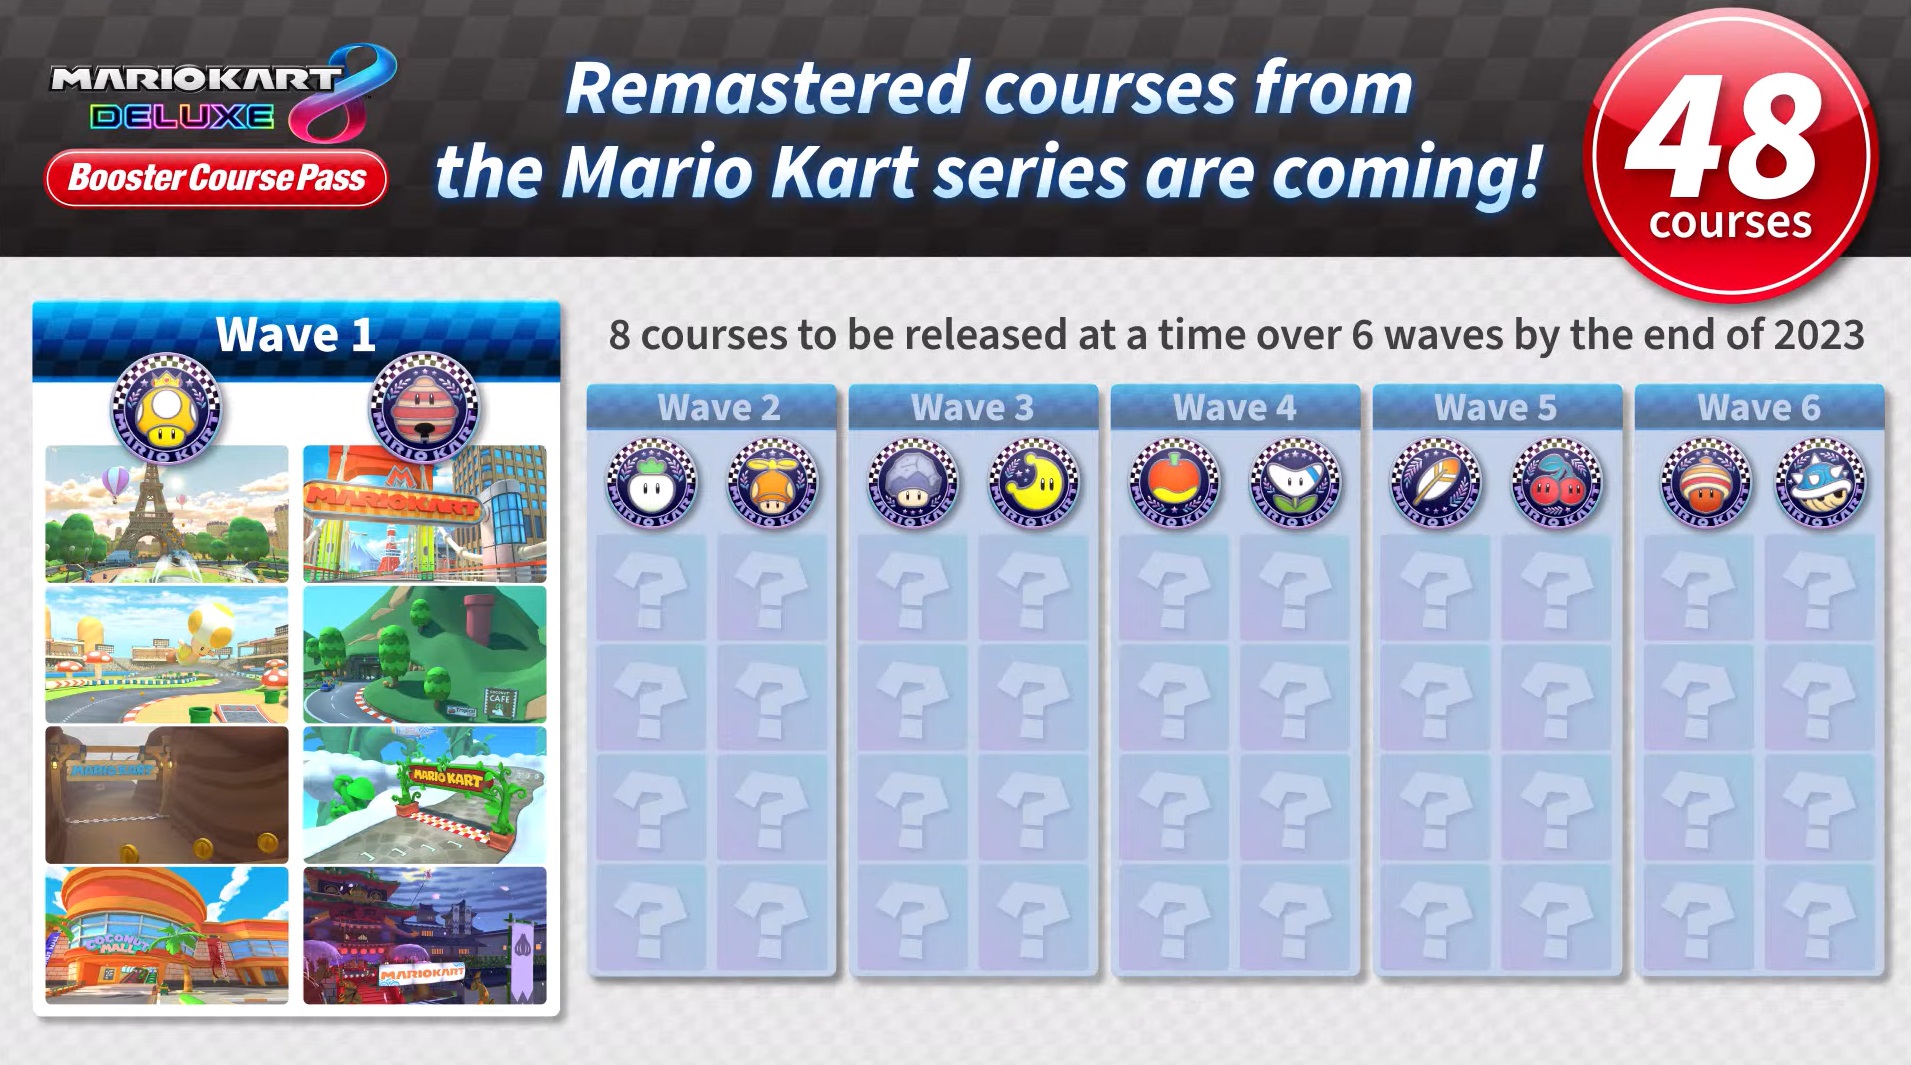 Nintendo are in for the long haul with this iteration of Mario Kart